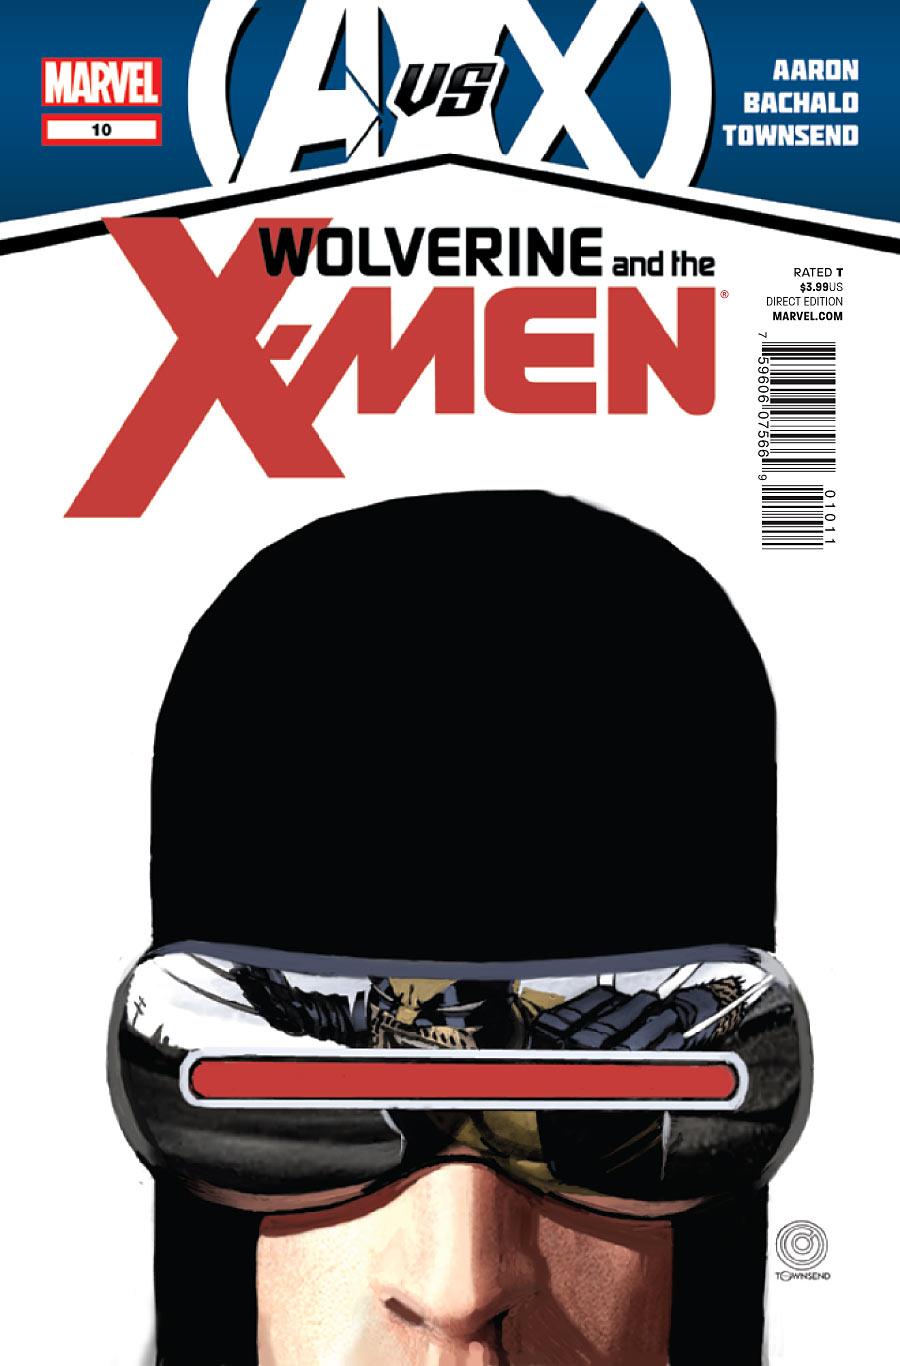 Wolverine and the X-Men Vol. 1 #10